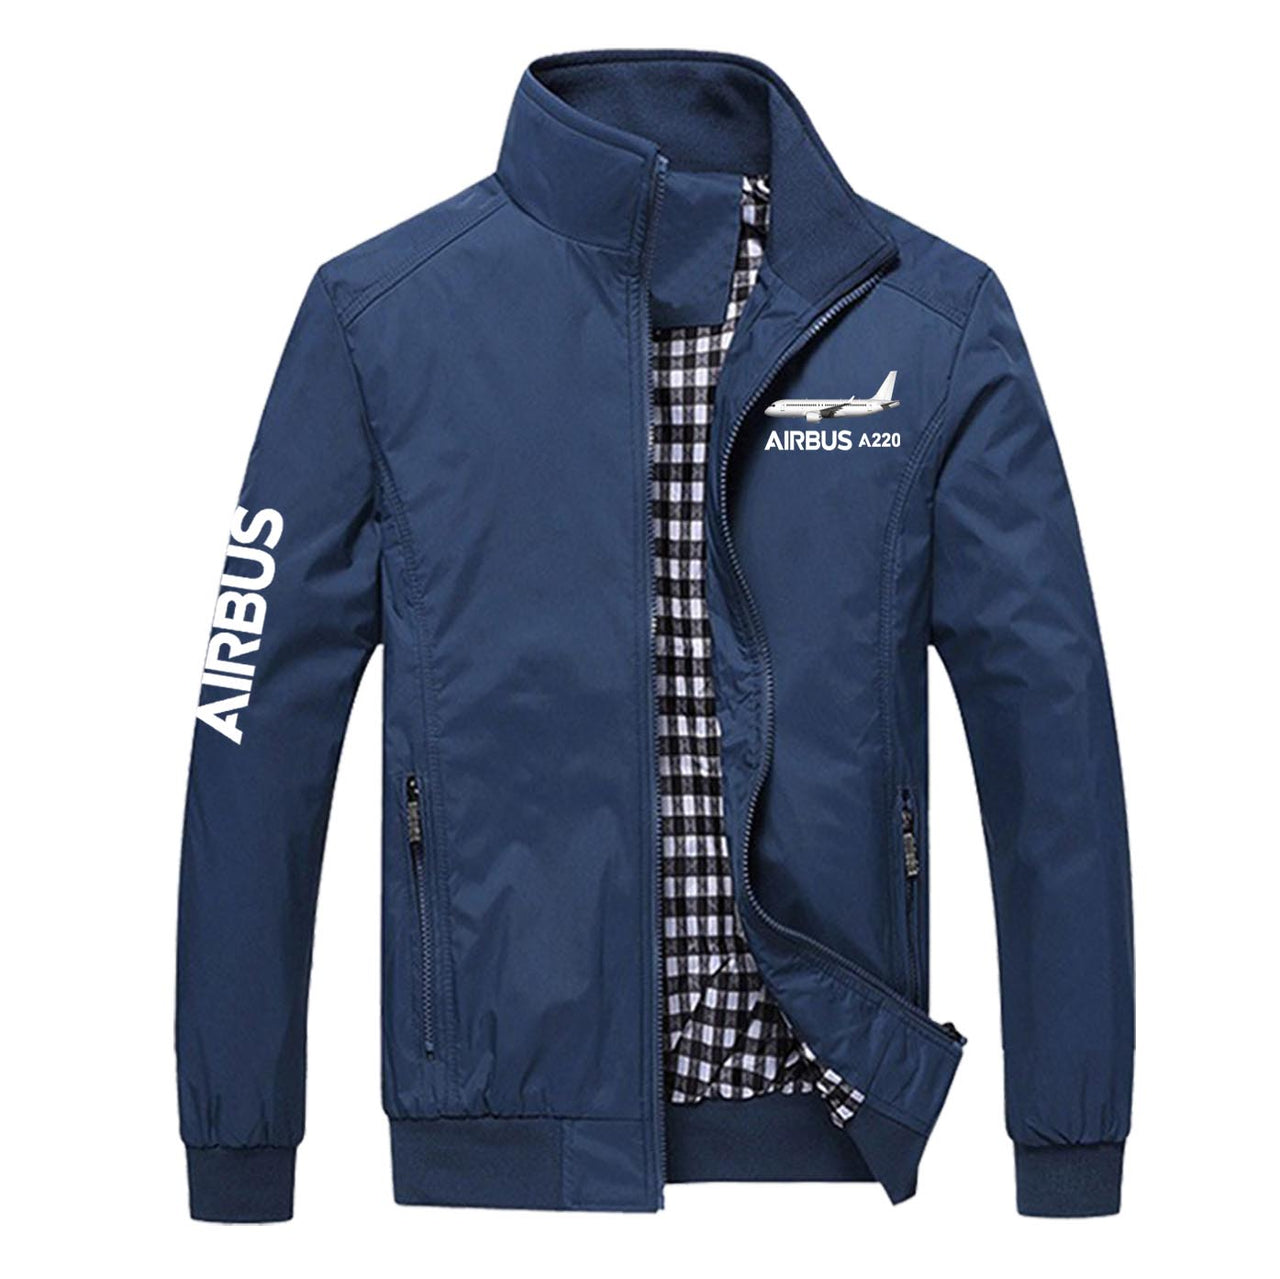 The Airbus A220 Designed Stylish Jackets